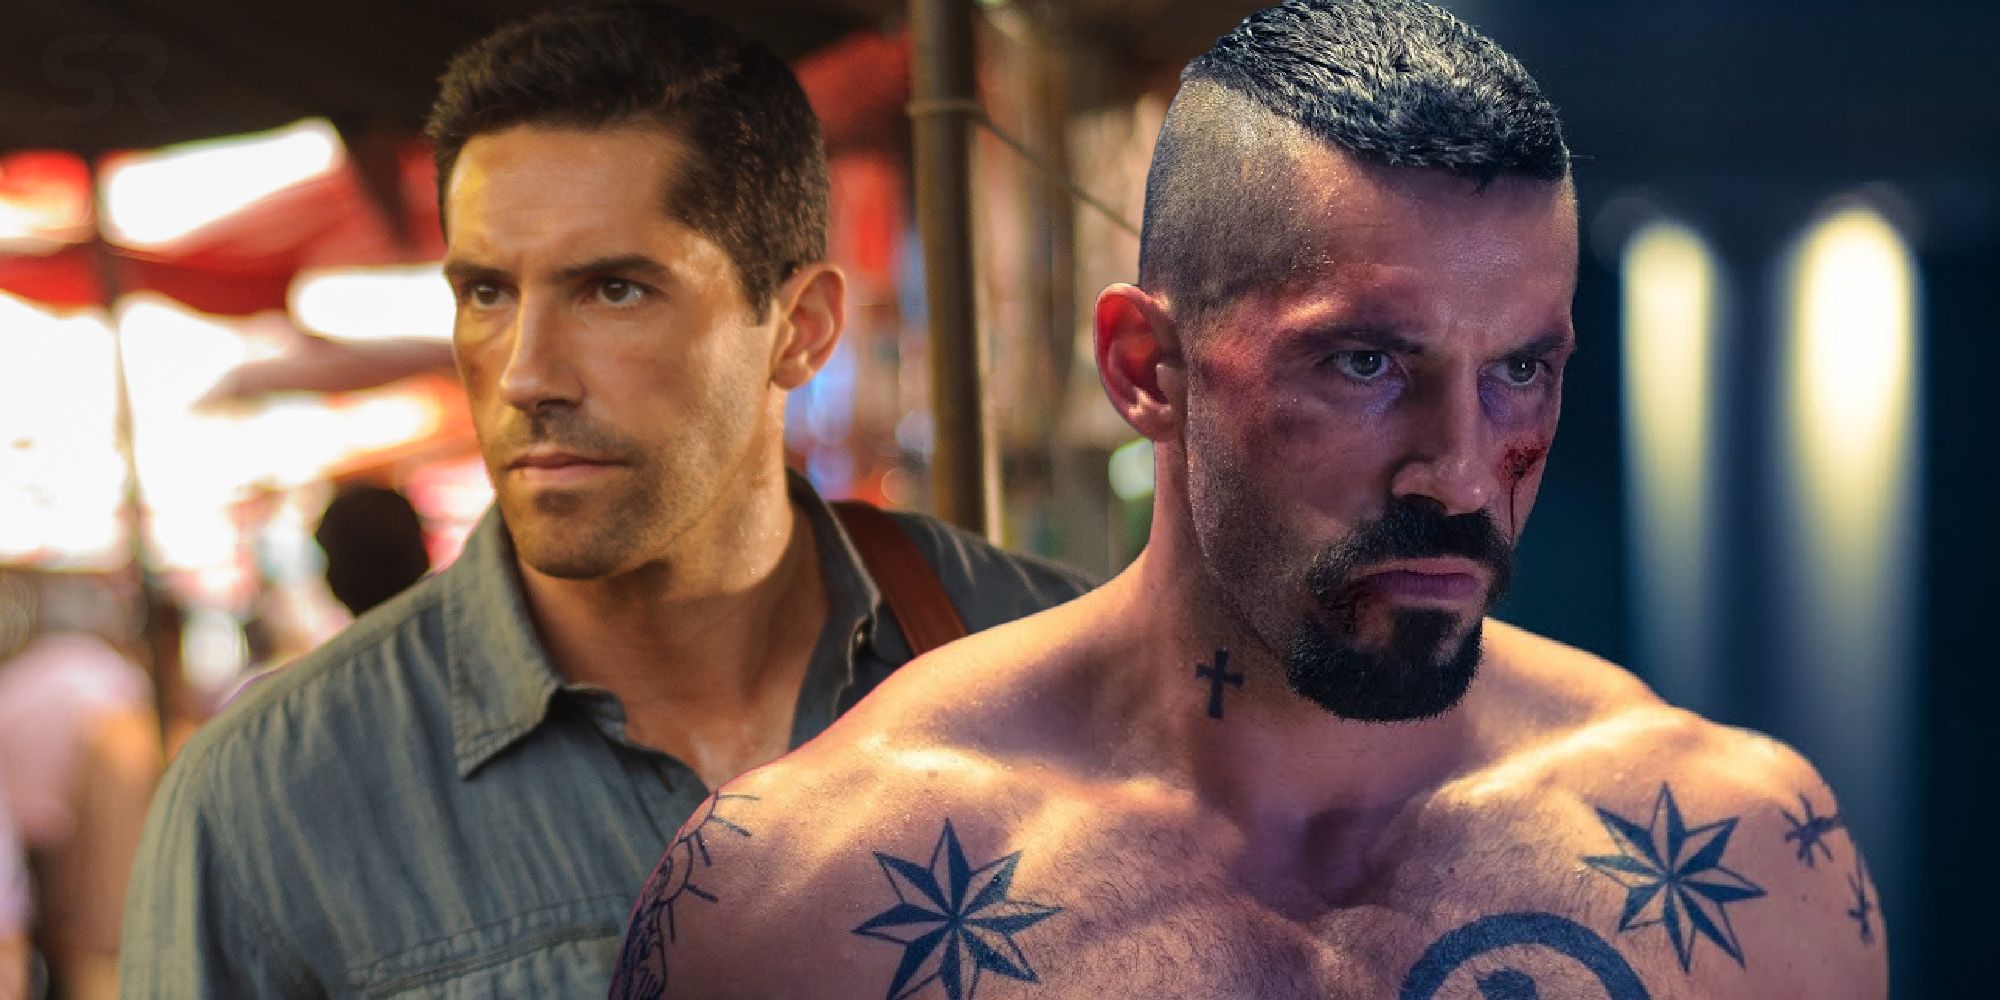 Which Scott Adkins Character Would Win In A Fight Yuri Boyka Or Casey Bowman